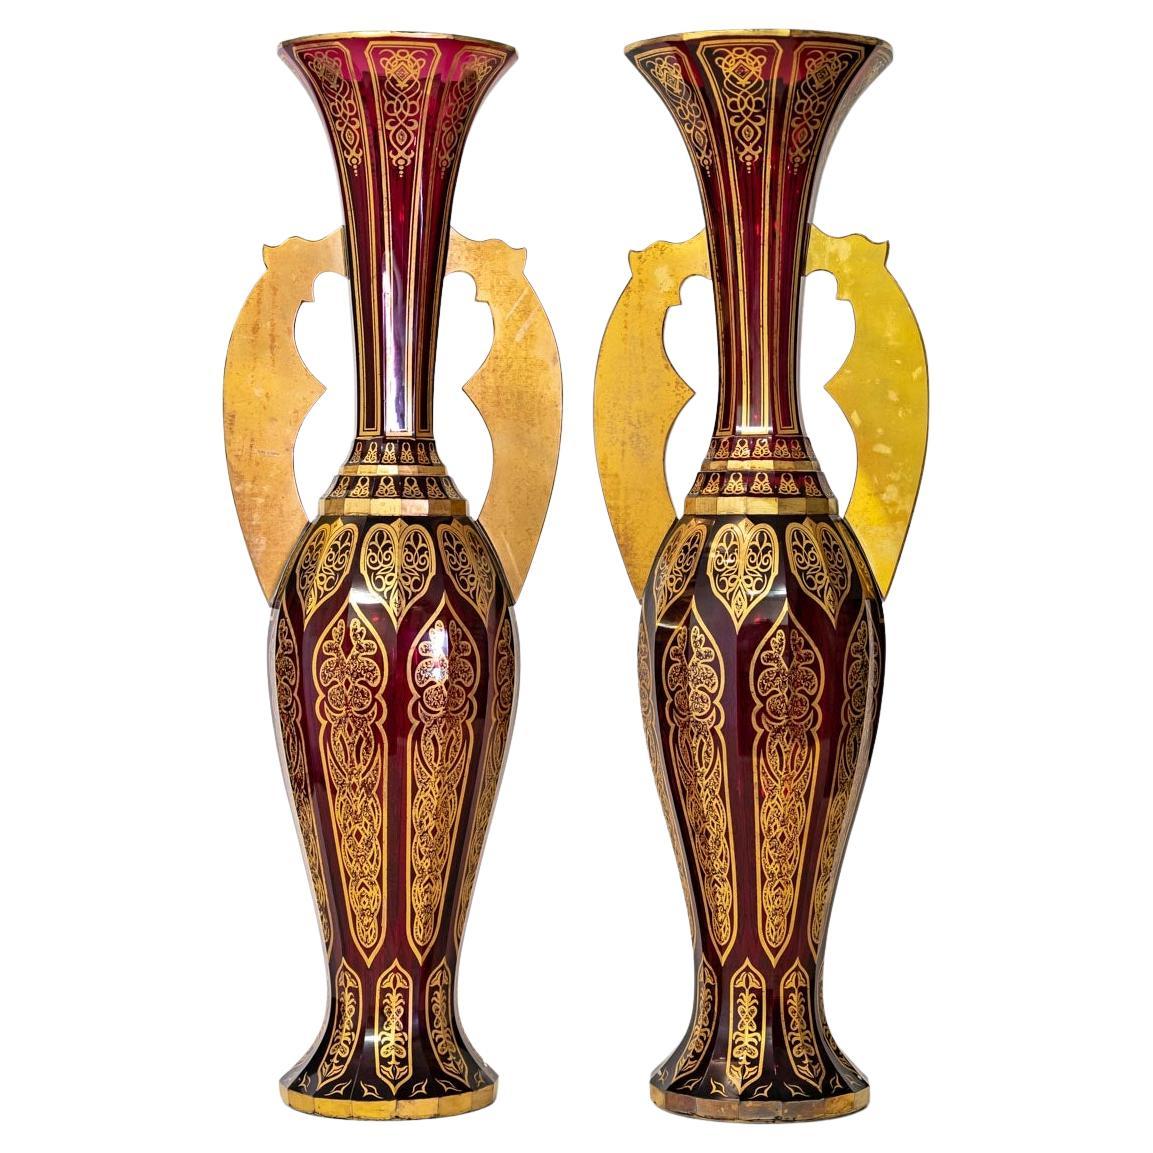 Pair of Bohemian Cut Crystal Vases in Ruby Red and Gold, 19th Century For Sale